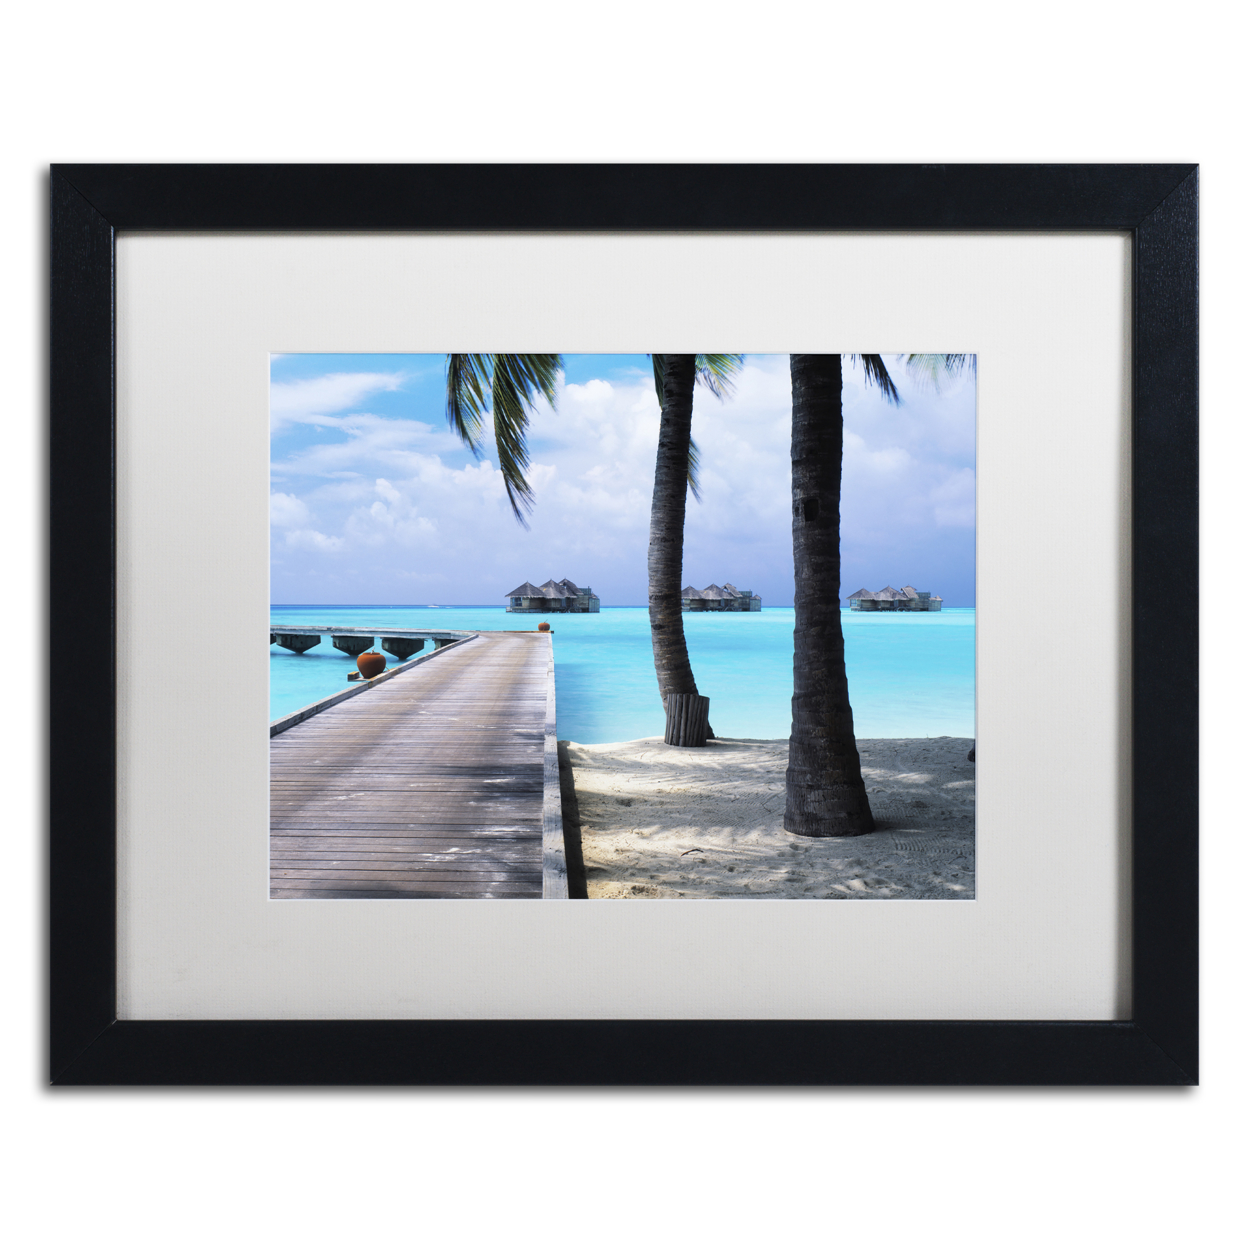 David Evans 'Pathway To Paradise' Black Wooden Framed Art 18 X 22 Inches